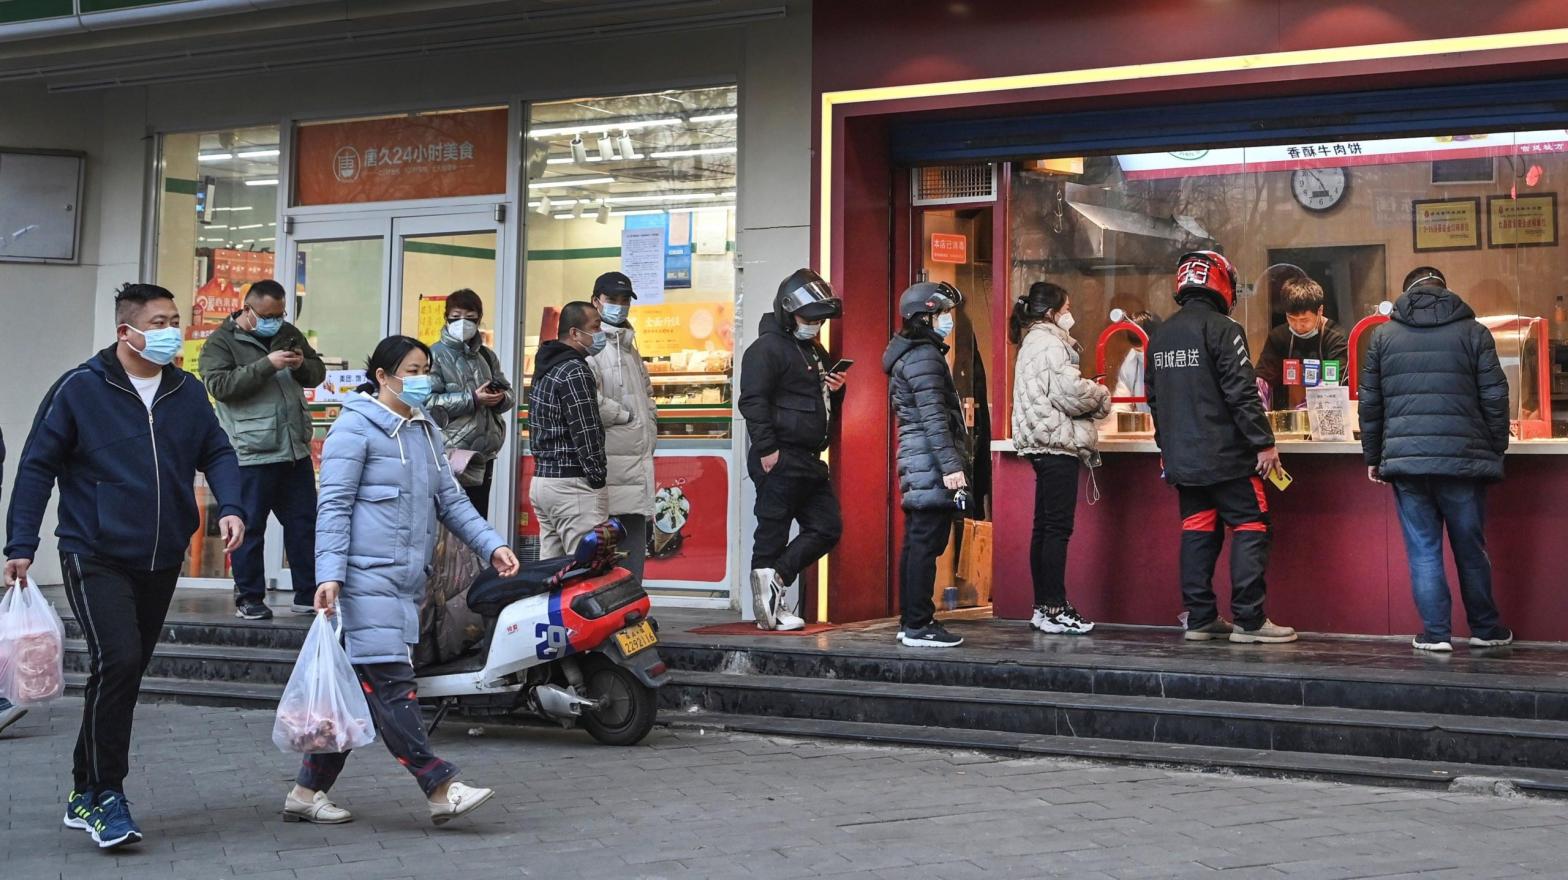 People line up to buy food at a booth in Xian, capital of northwest China's Shaanxi Province, on Jan. 17, 2022 during the city's strict lockdown. (Photo: Tao Ming, Getty Images)